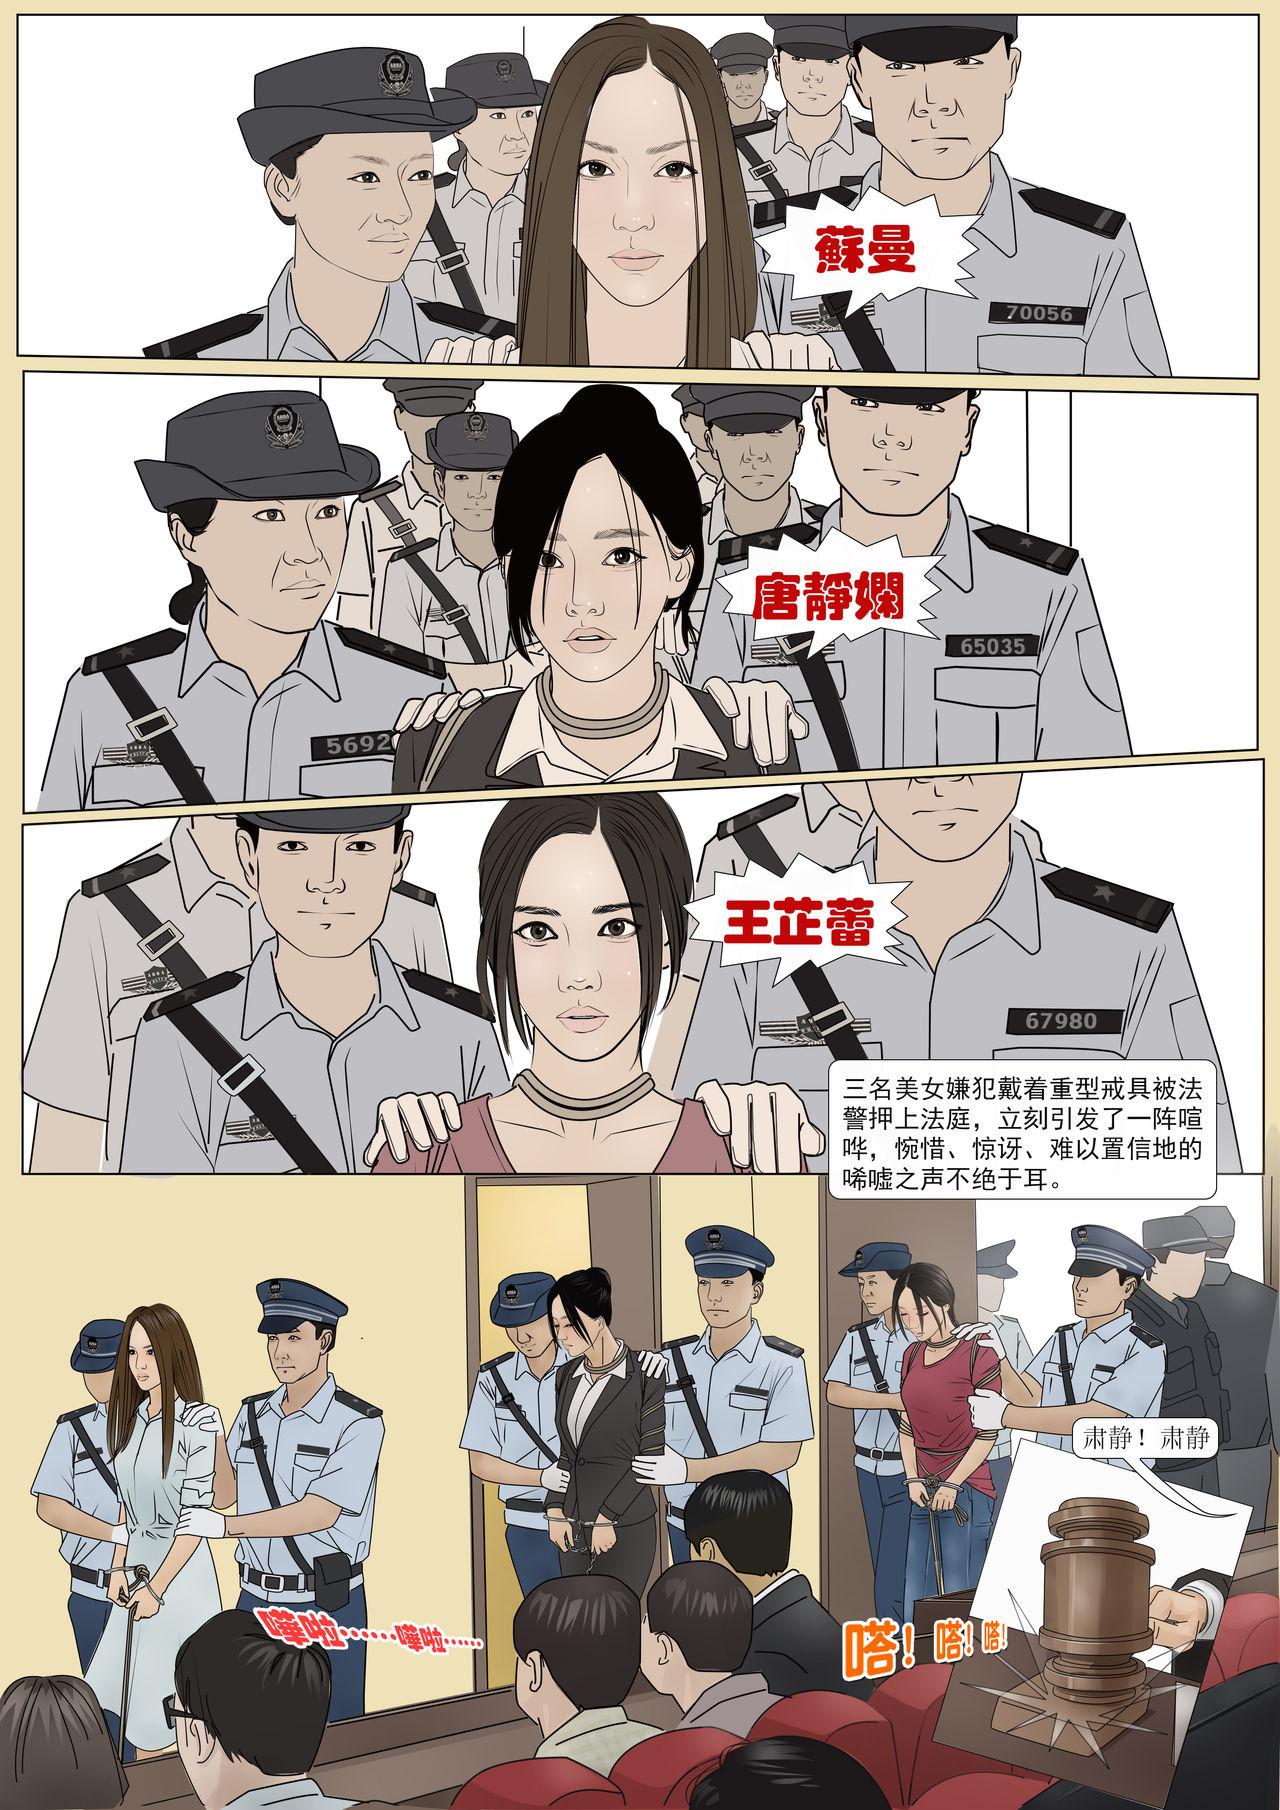 Long Hair 枫语漫画 Foryou 《极度重犯》第八话 Three Female Prisoners 8 Chinese Free Rough Porn - Page 11